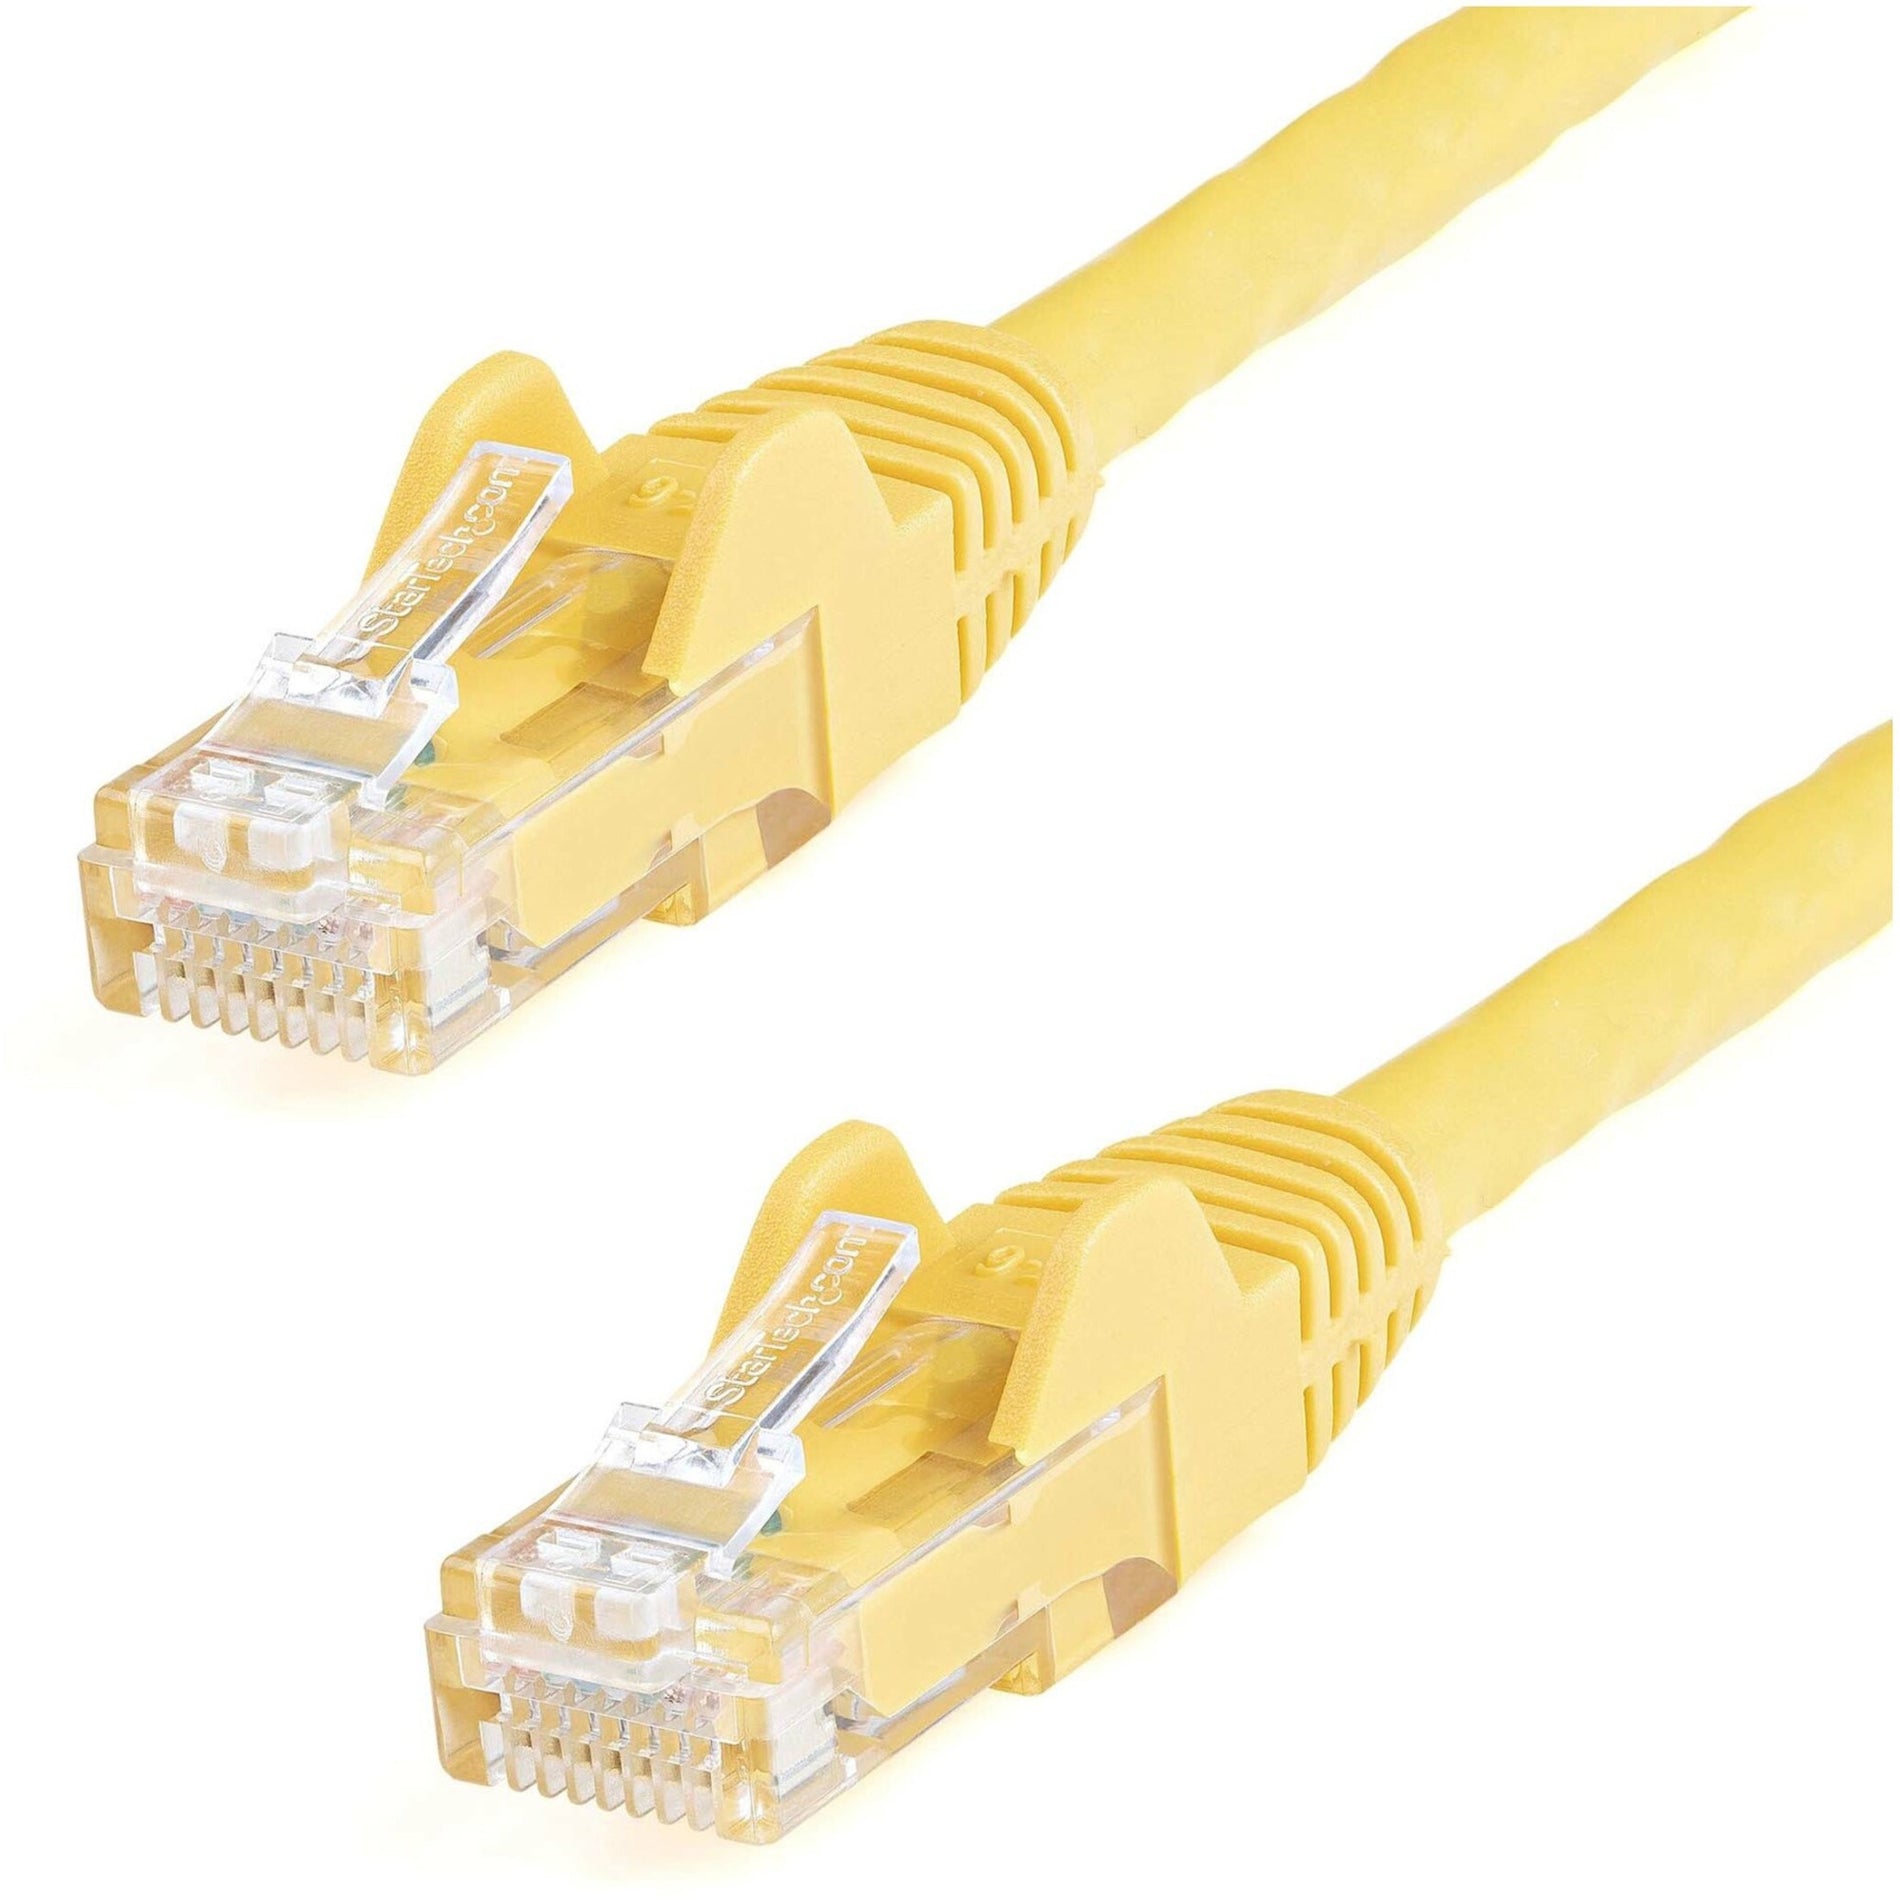 StarTech.com N6PATCH50YL 50 ft. Cat6 Patch Cable - Yellow, Lifetime Warranty, Snagless, 10 Gbit/s Data Transfer Rate